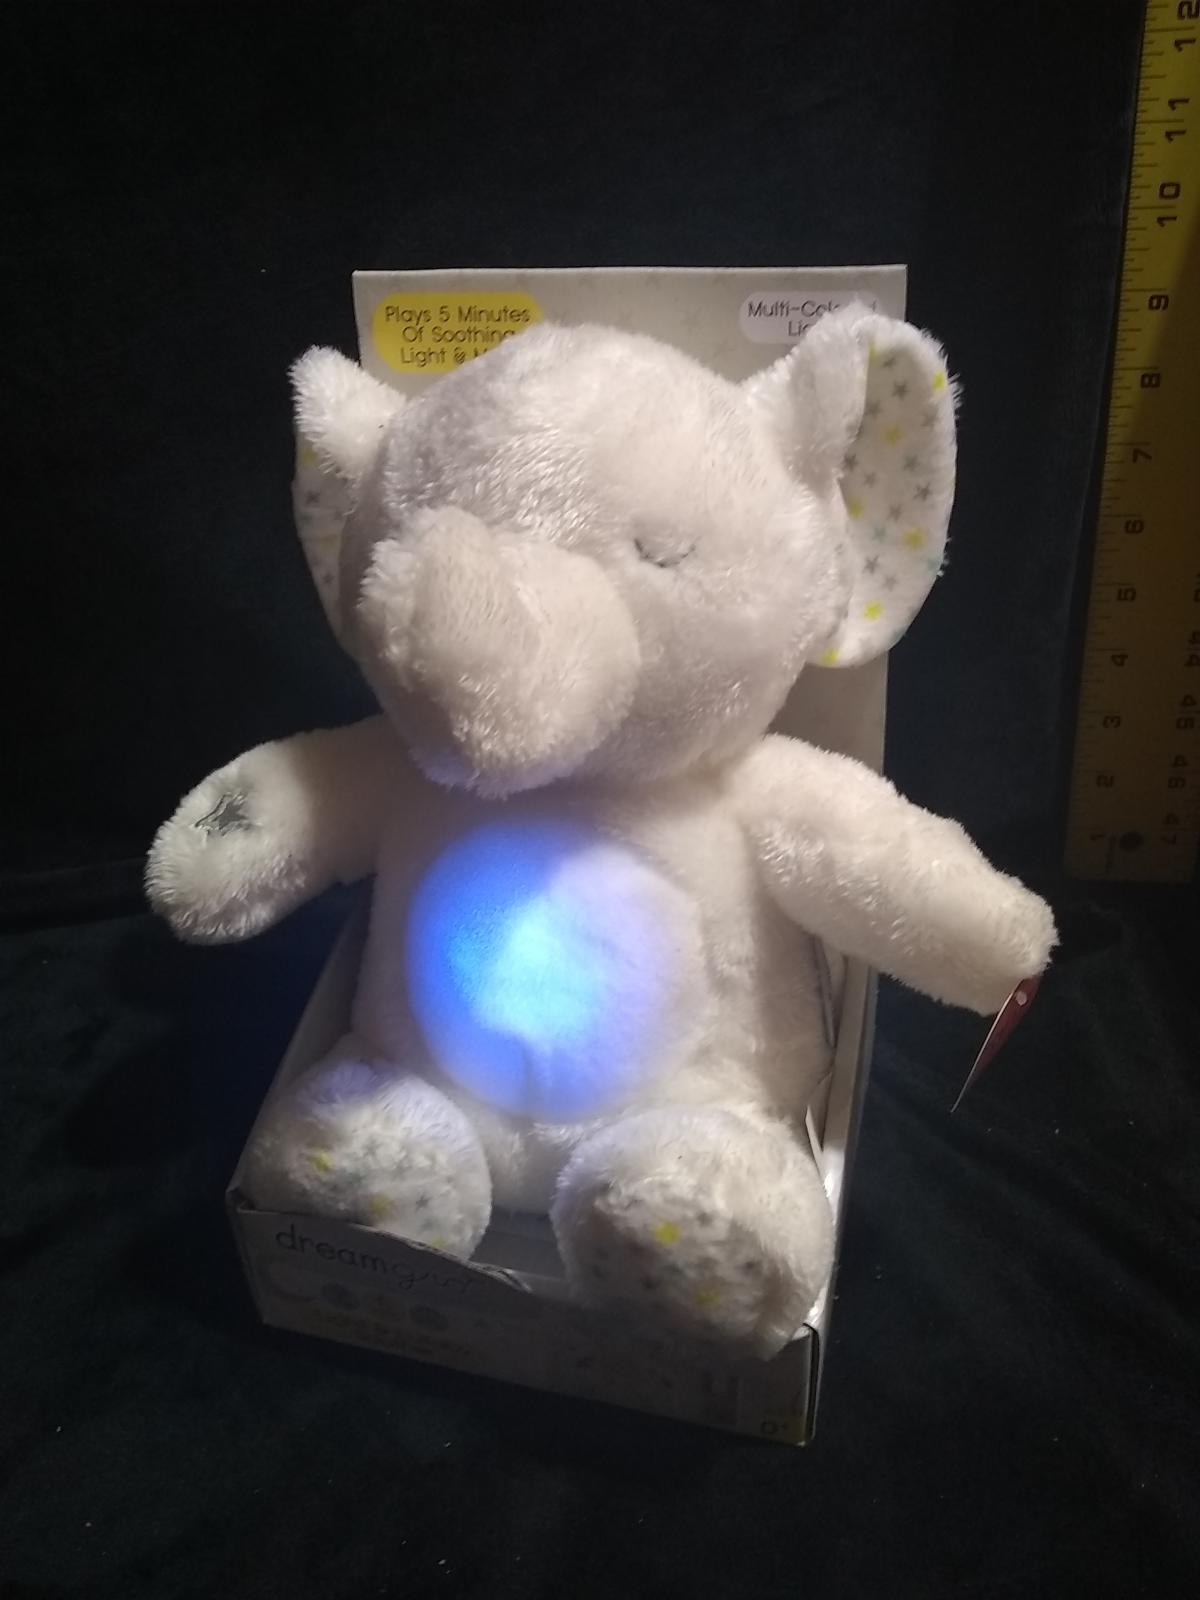 Dream Gro Light & Lullaby Soother-NIP